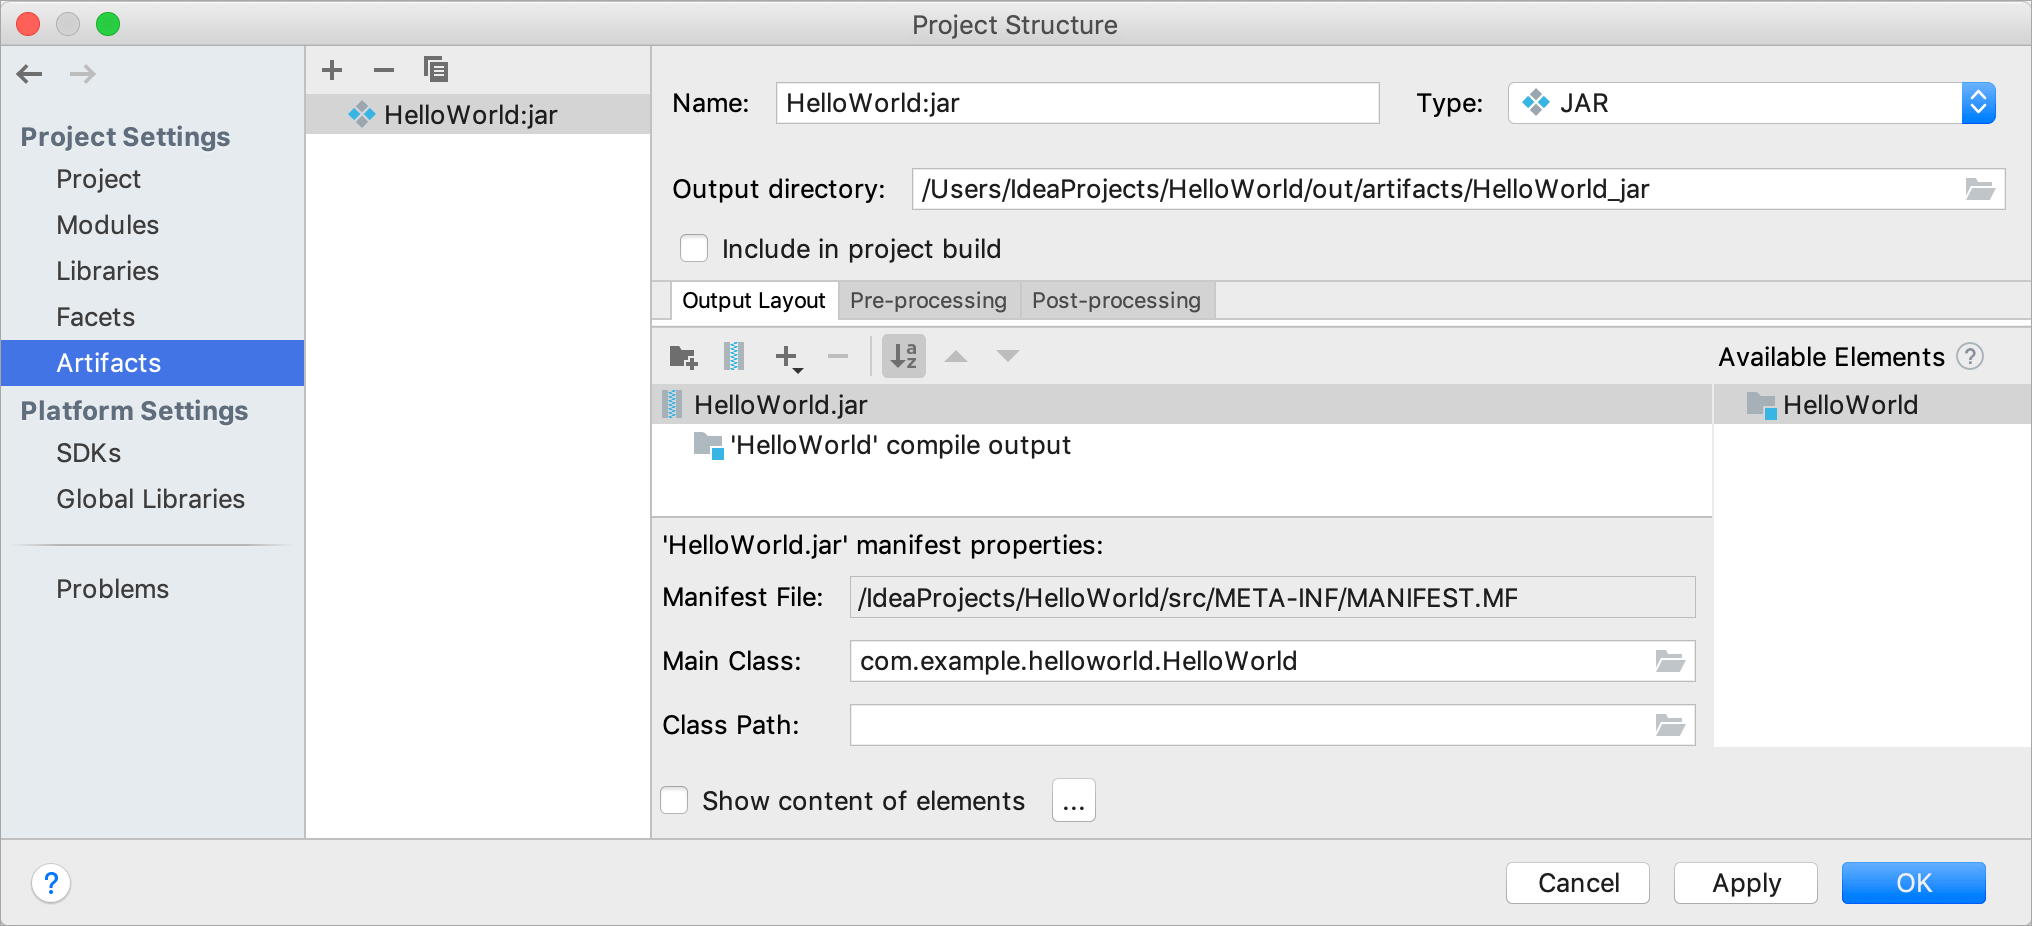 Project Structure dialog / Artifacts page